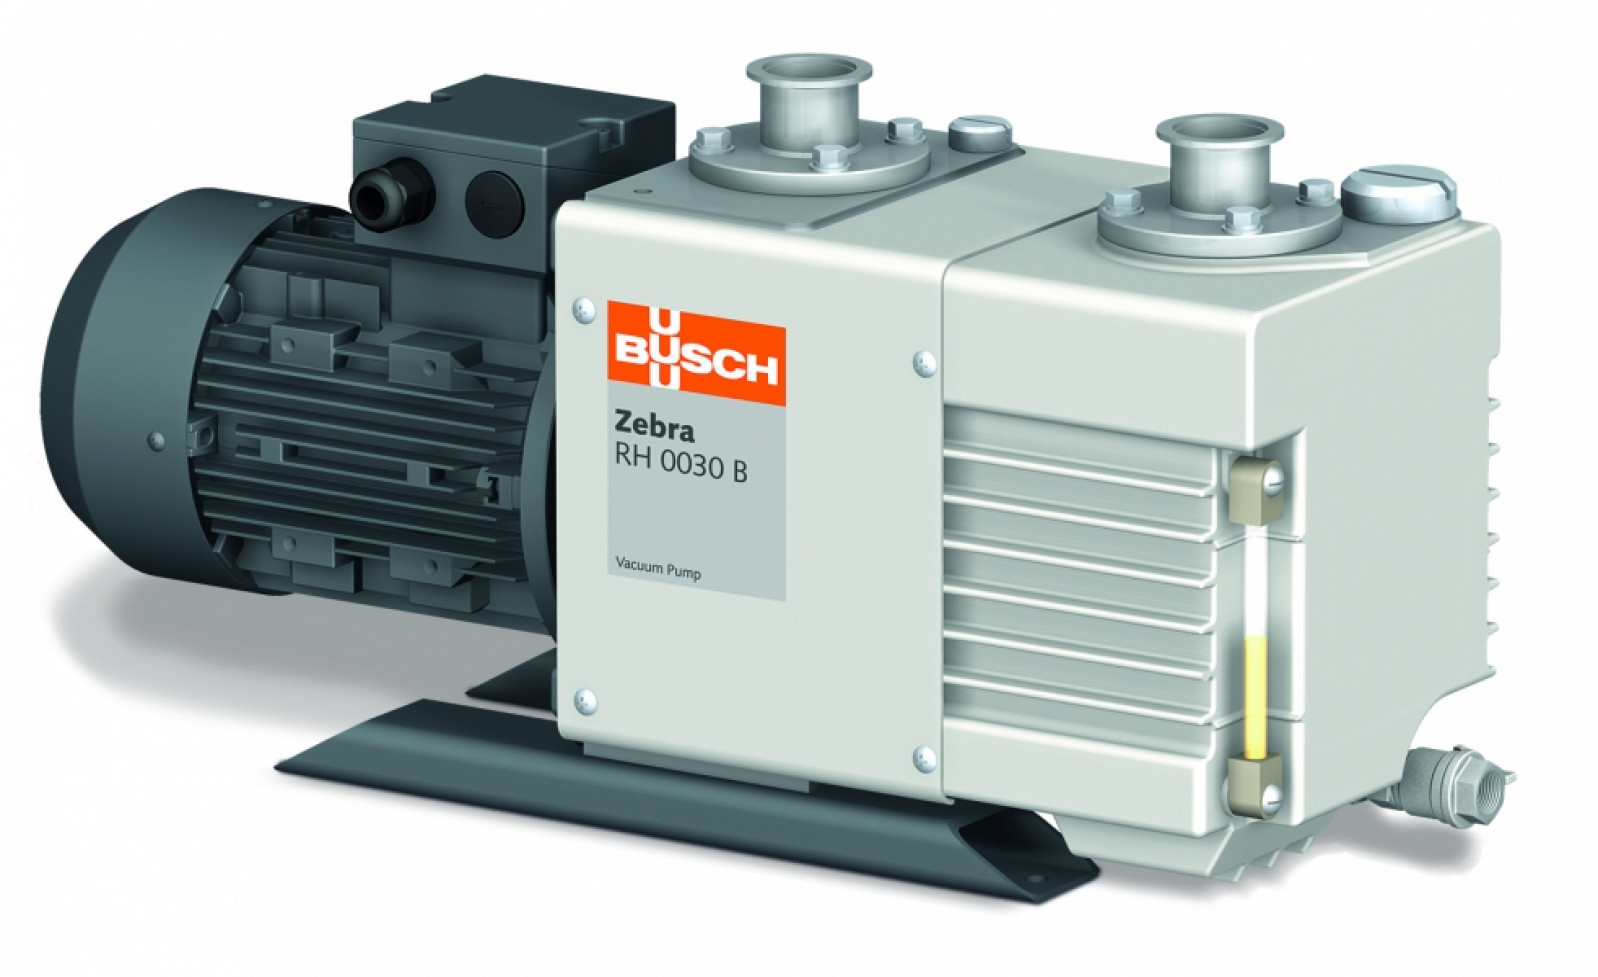 New vacuum pumps for laboratories and production